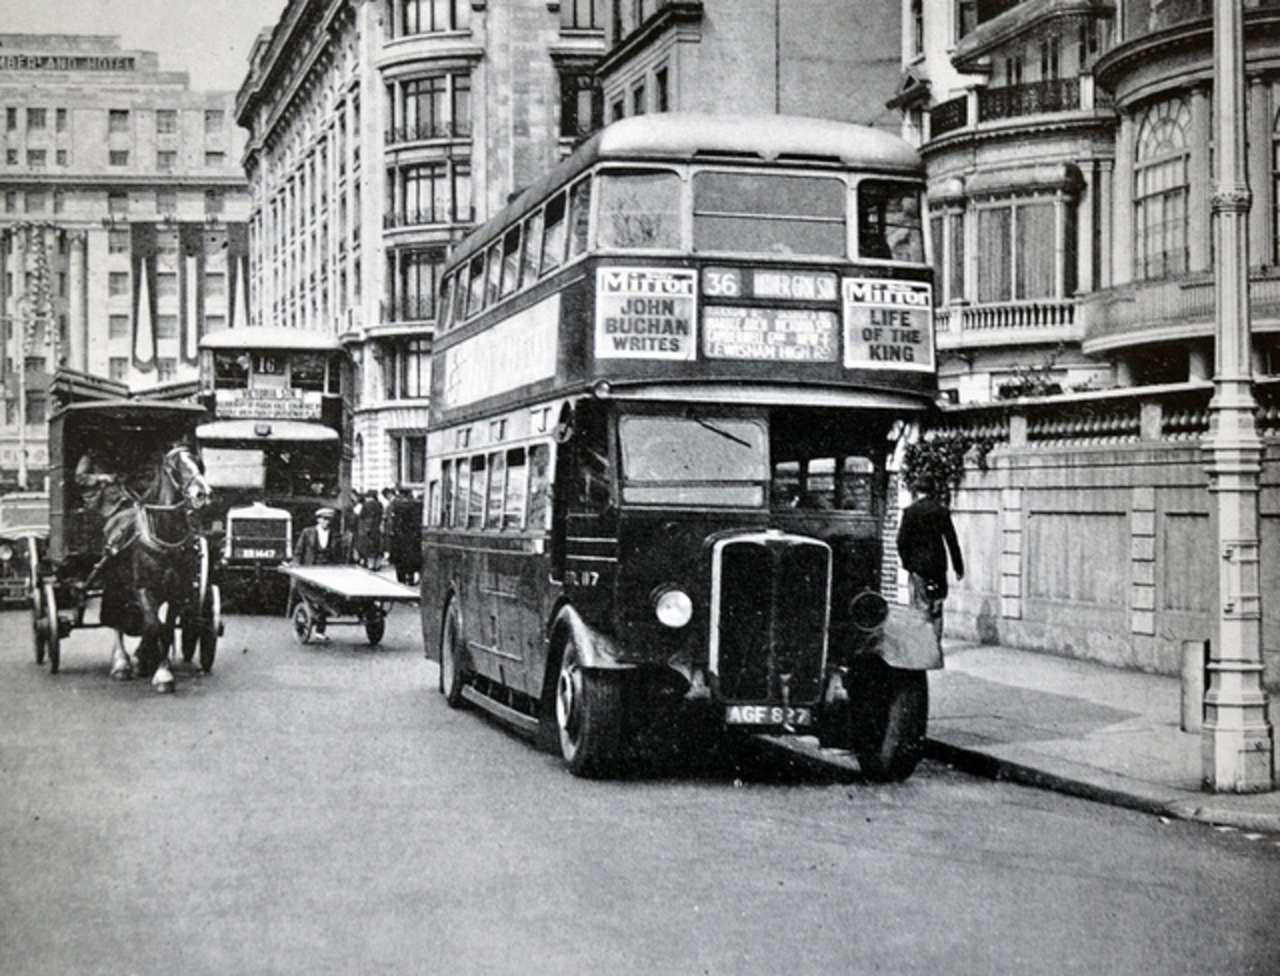 Tillings Bodied AEC STL In London, Post 1933 | Flickr - Photo Sharing!